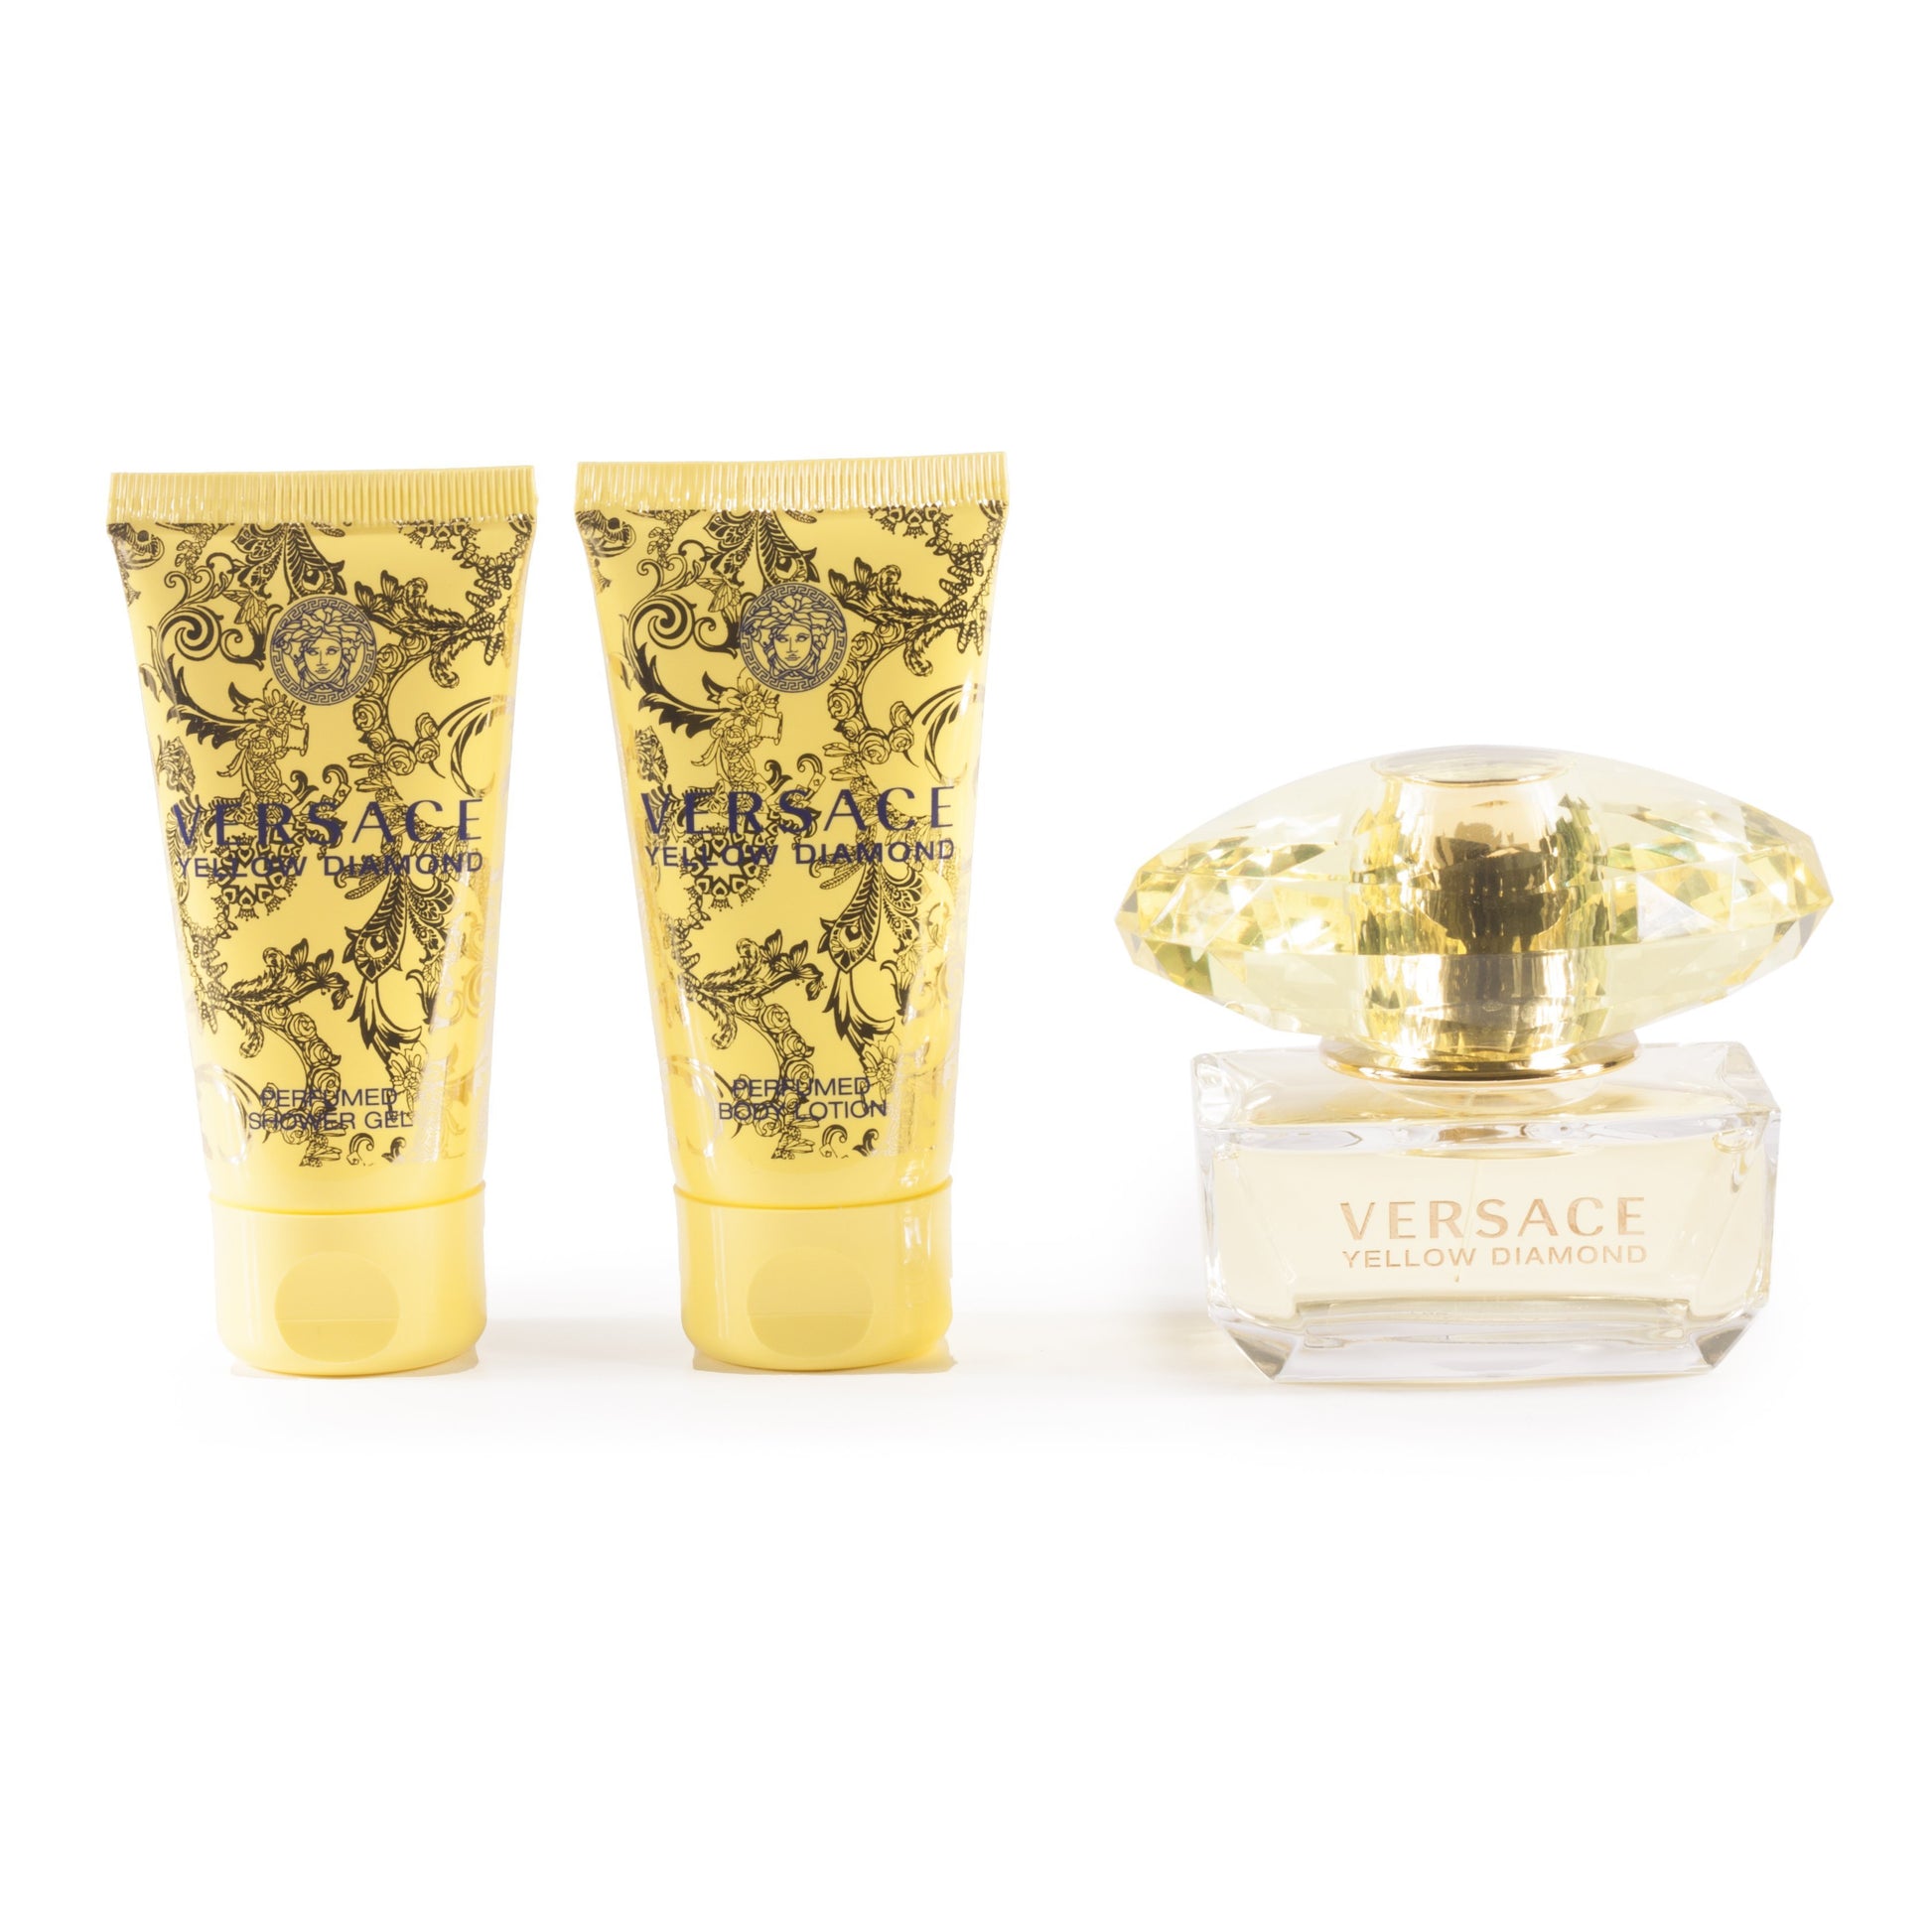 Yellow Diamond Gift Set Eau de Toilette, Body Lotion and Shower Gel for Women by Versace 1.7 oz. Click to open in modal